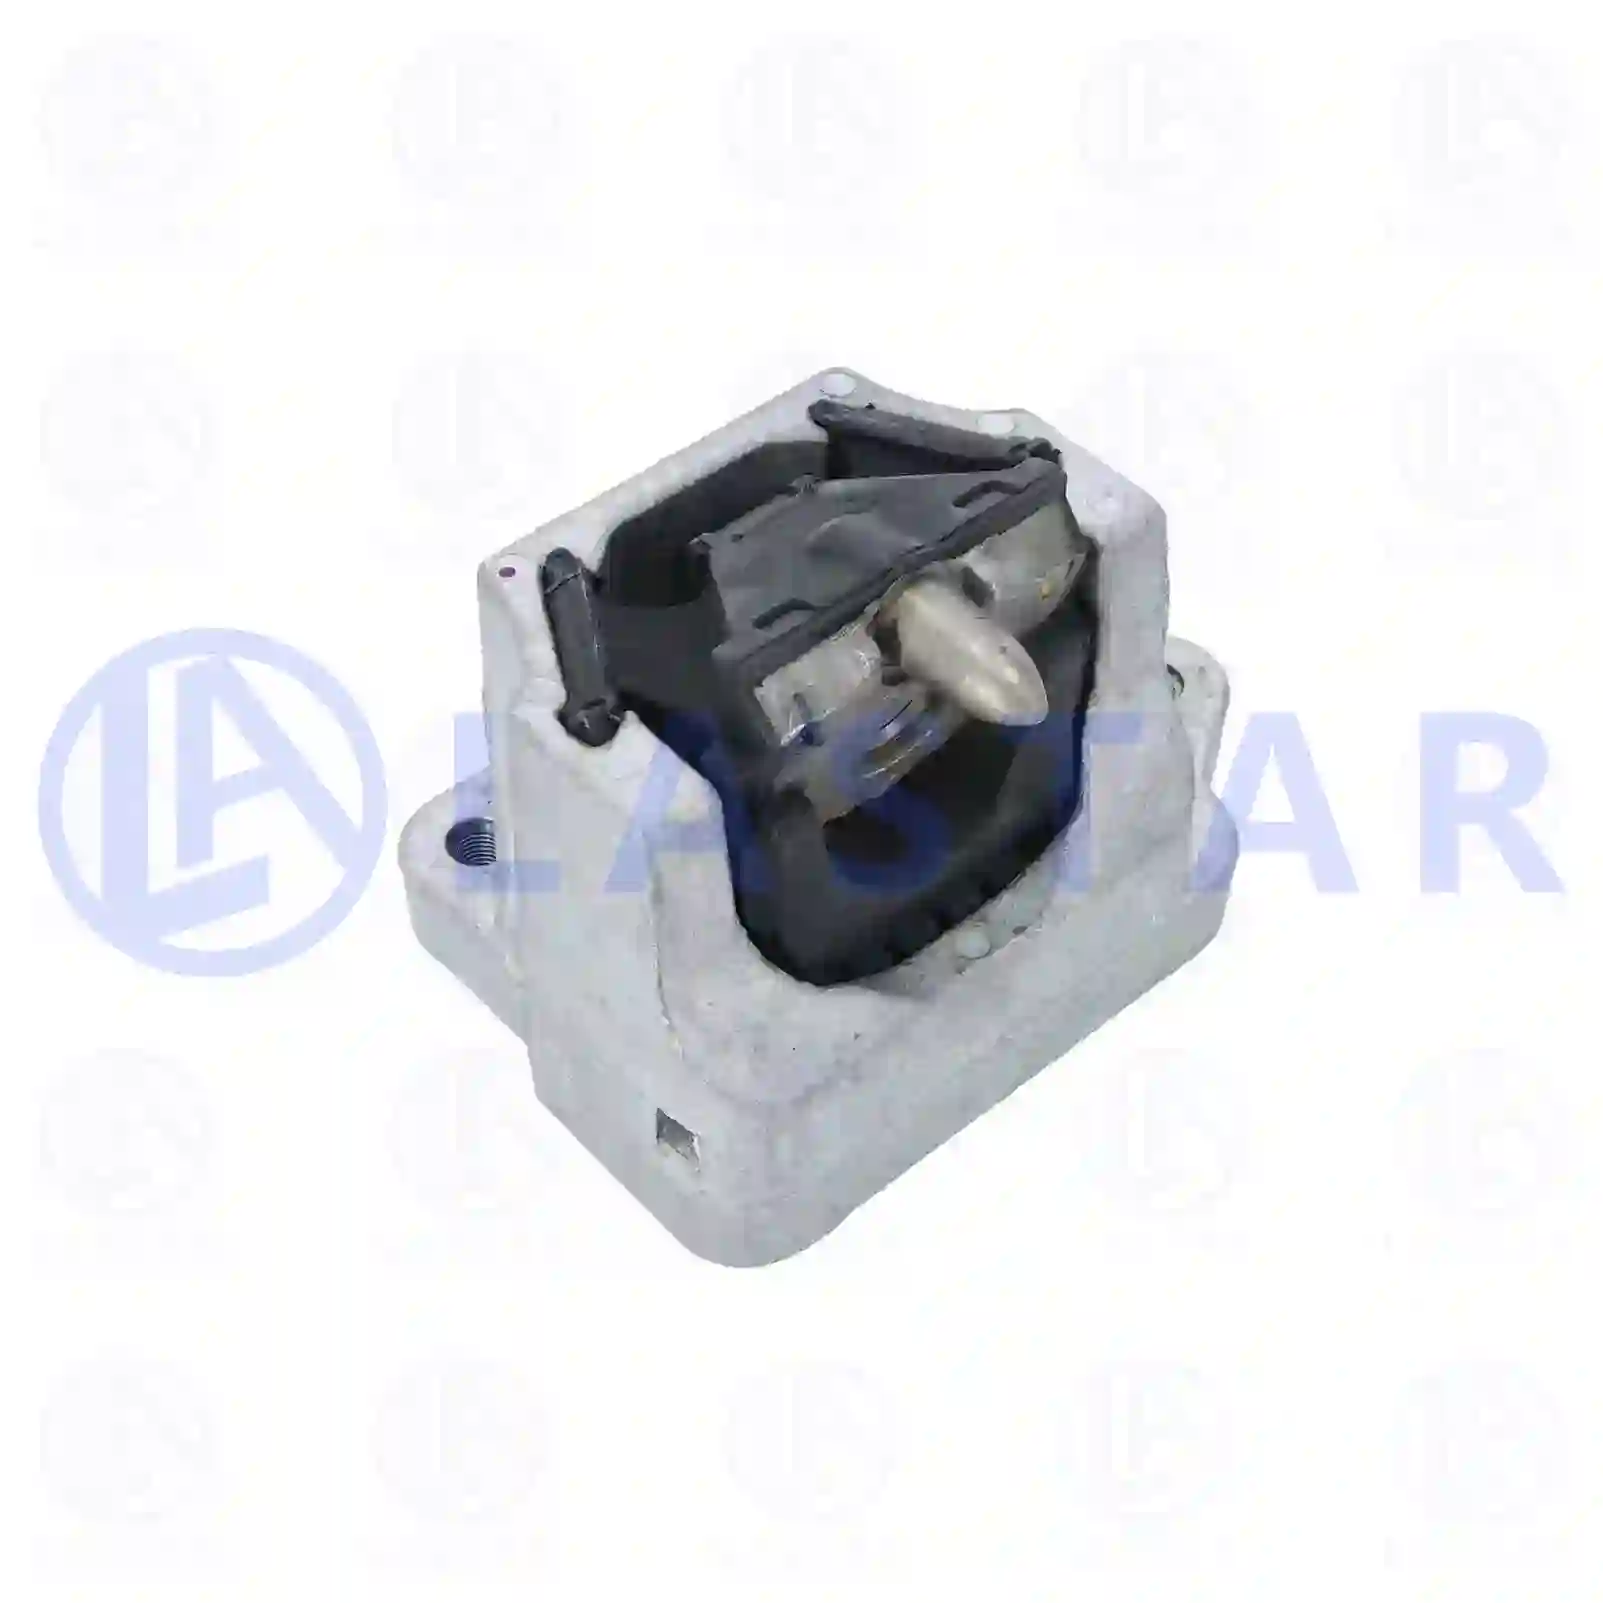 Engine mounting, front, 77702468, 9672410013 ||  77702468 Lastar Spare Part | Truck Spare Parts, Auotomotive Spare Parts Engine mounting, front, 77702468, 9672410013 ||  77702468 Lastar Spare Part | Truck Spare Parts, Auotomotive Spare Parts